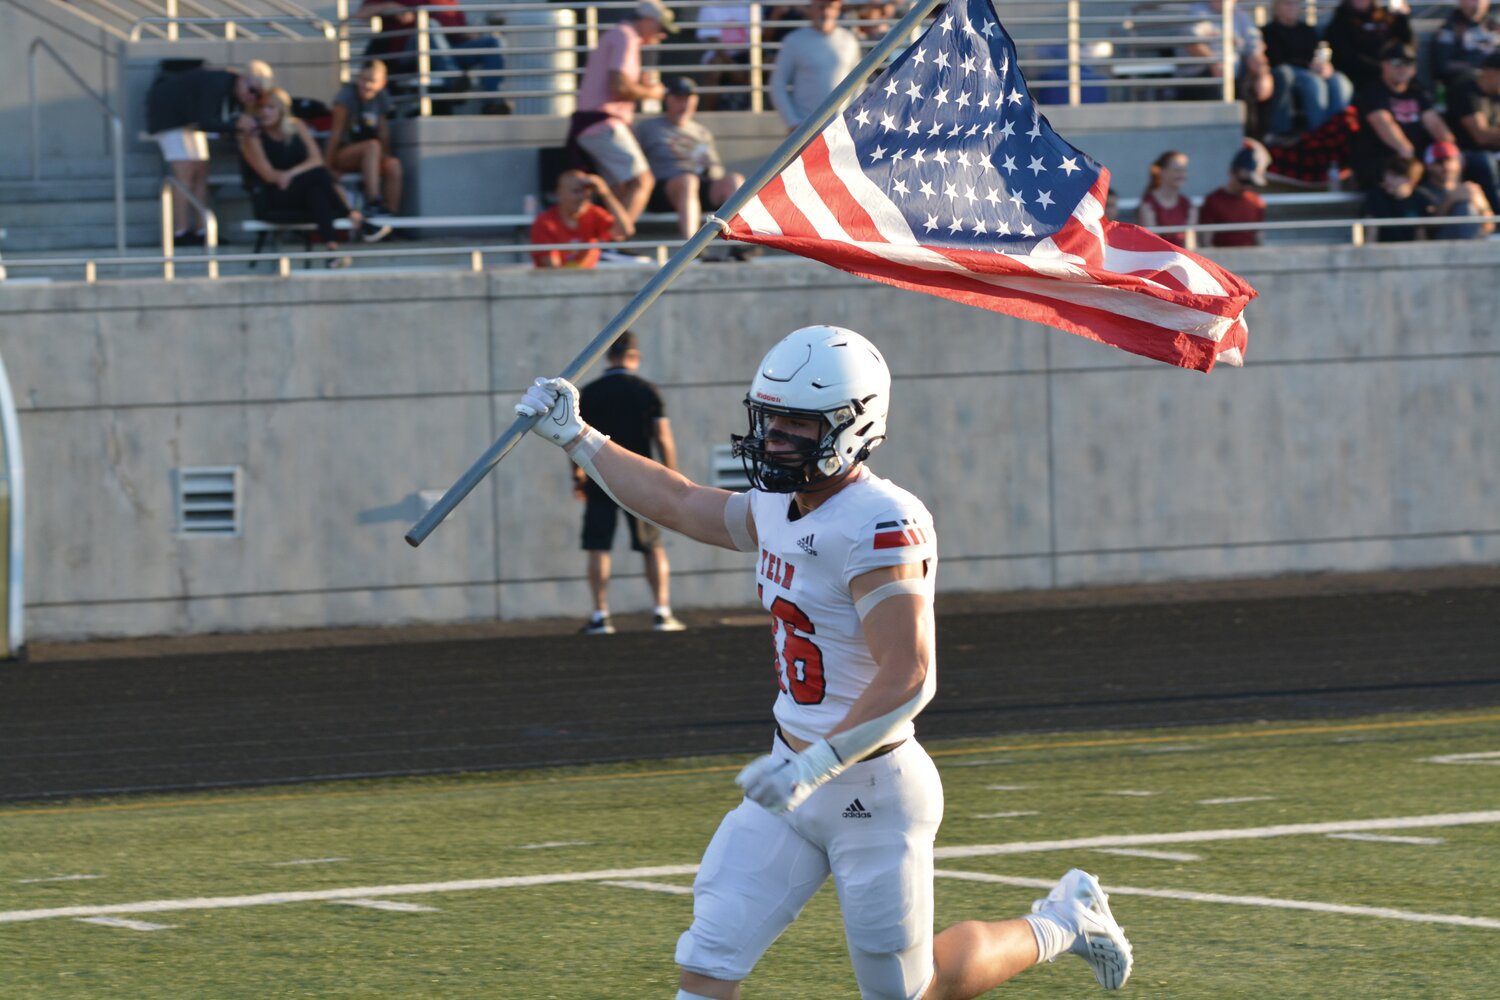 Junior linebacker Nathan Ford carries the American flag onto the field pre-game on Sept. 1 against Camas High School.